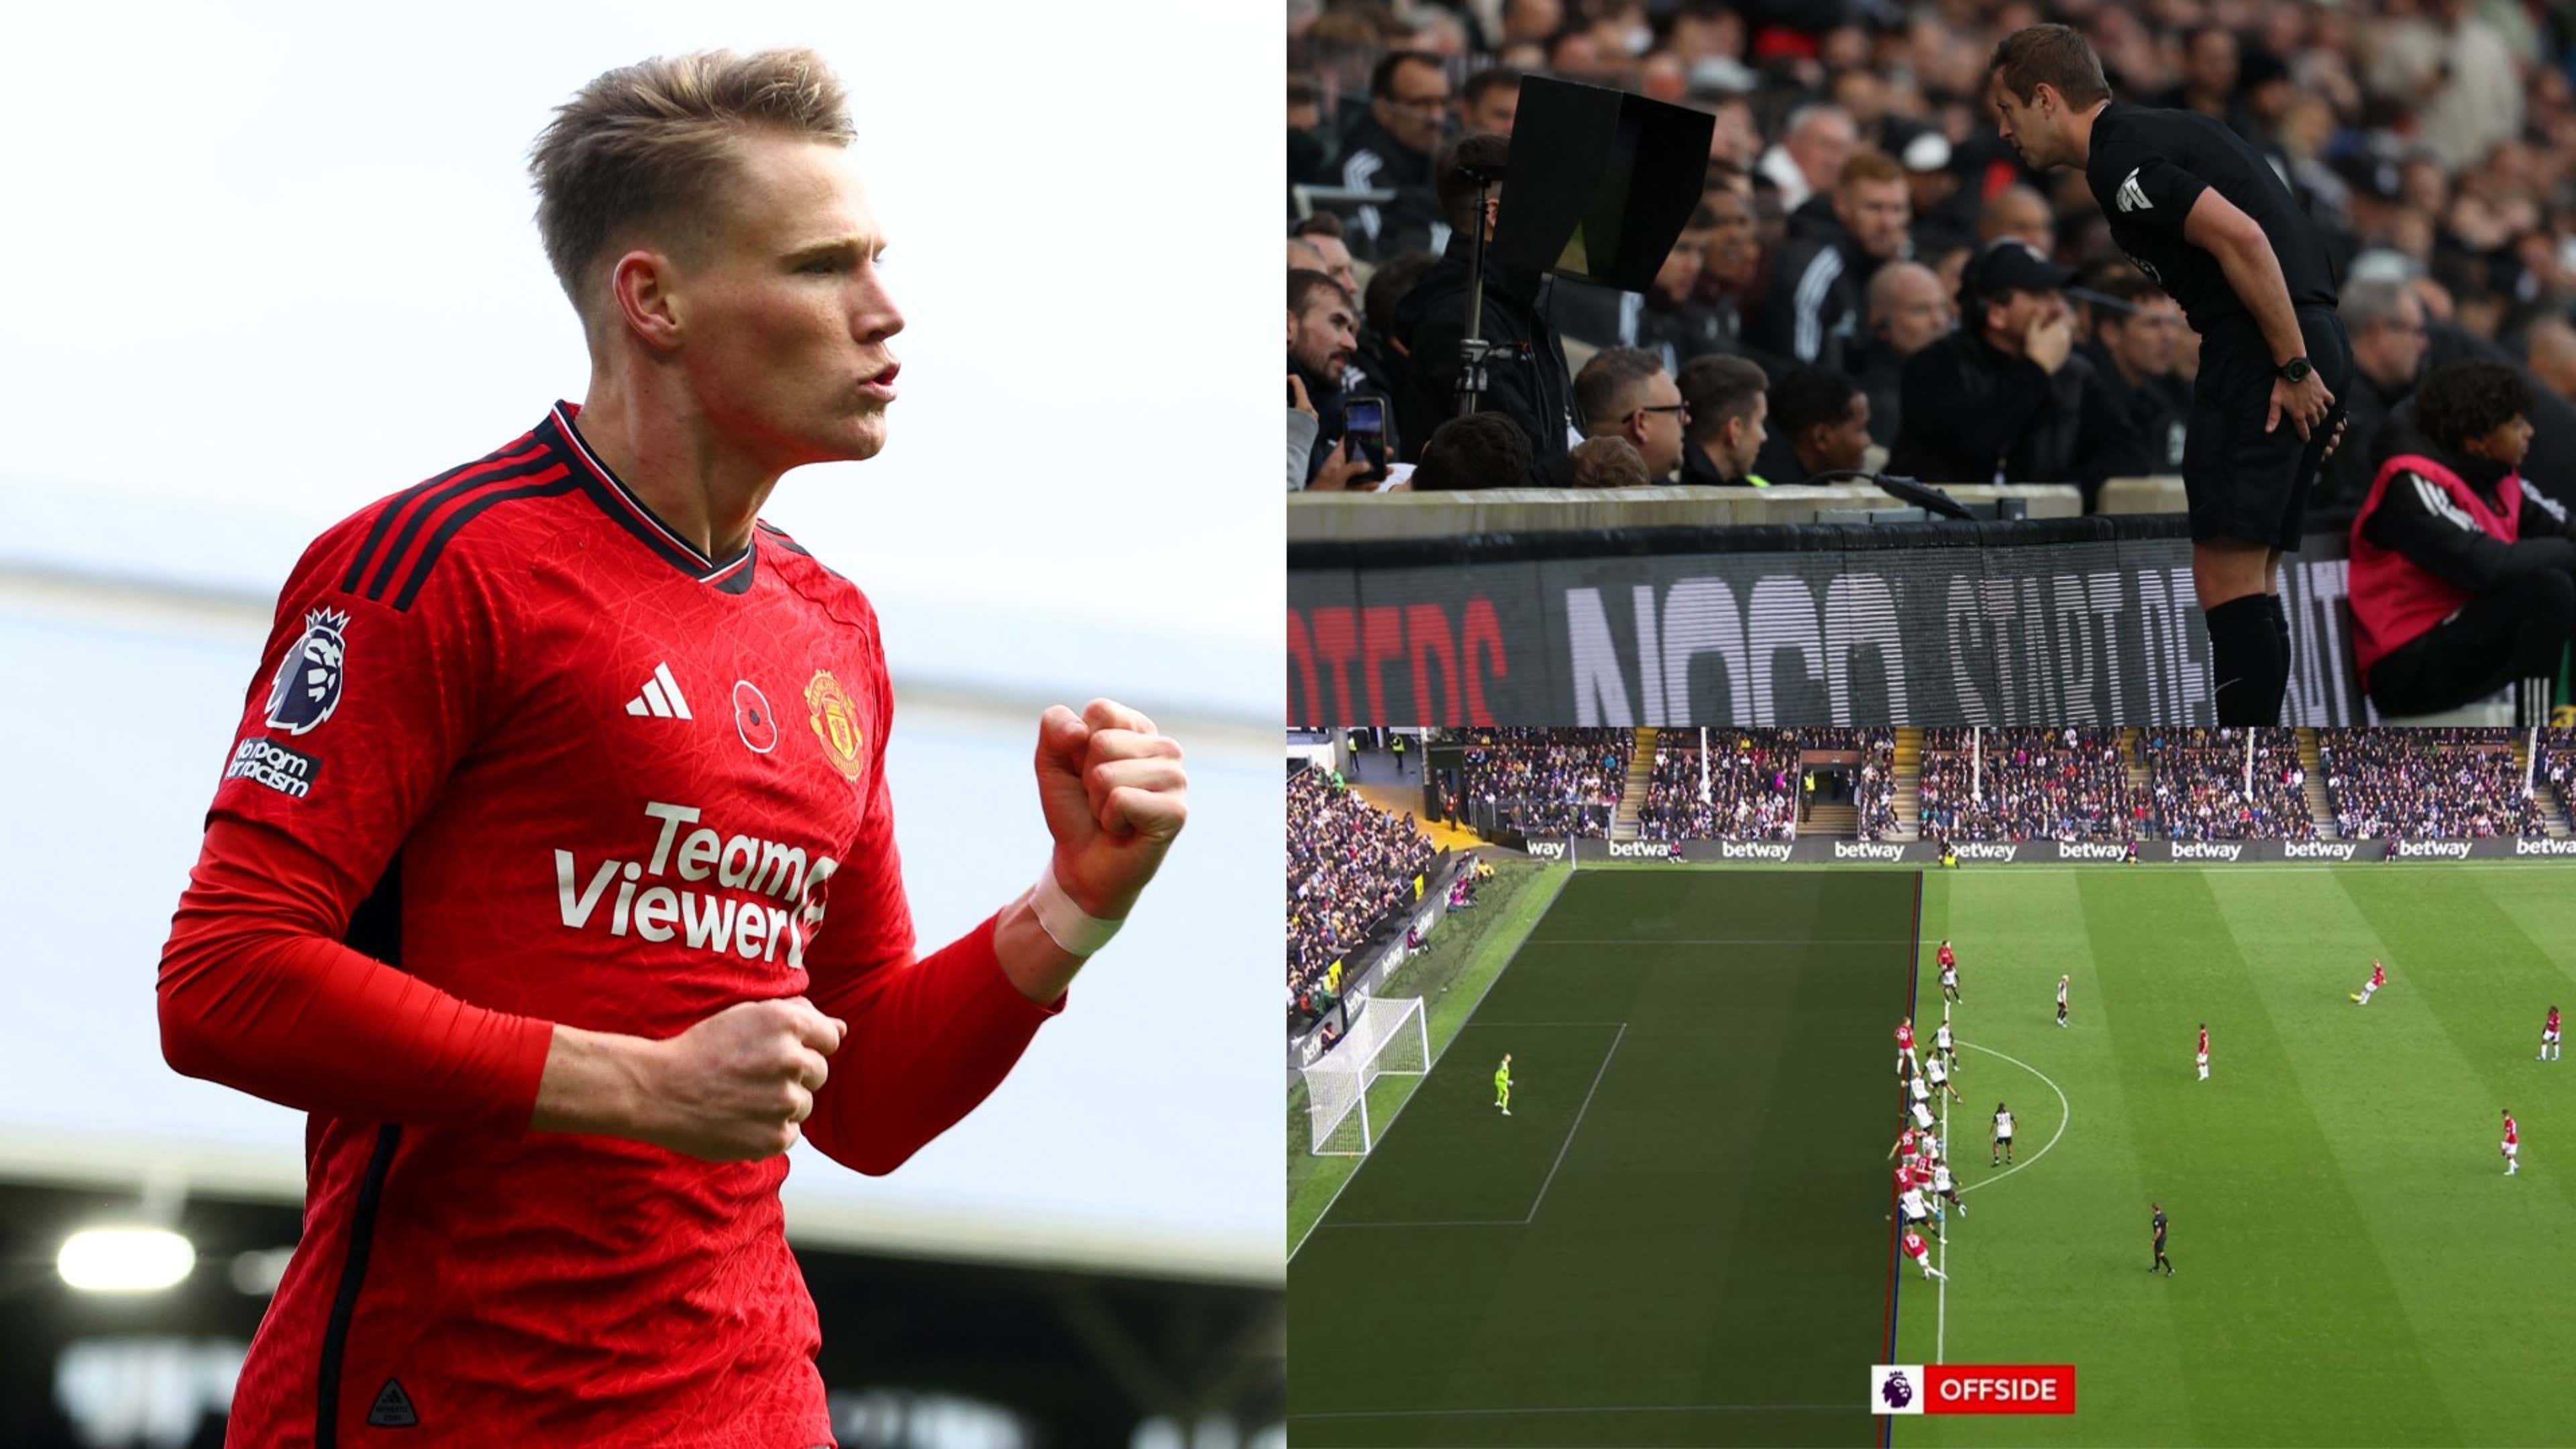 Explained: Why Scott McTominay's goal for Man Utd against Fulham was  disallowed for offside after on-screen review - despite Alejandro Garnacho  being onside for assist